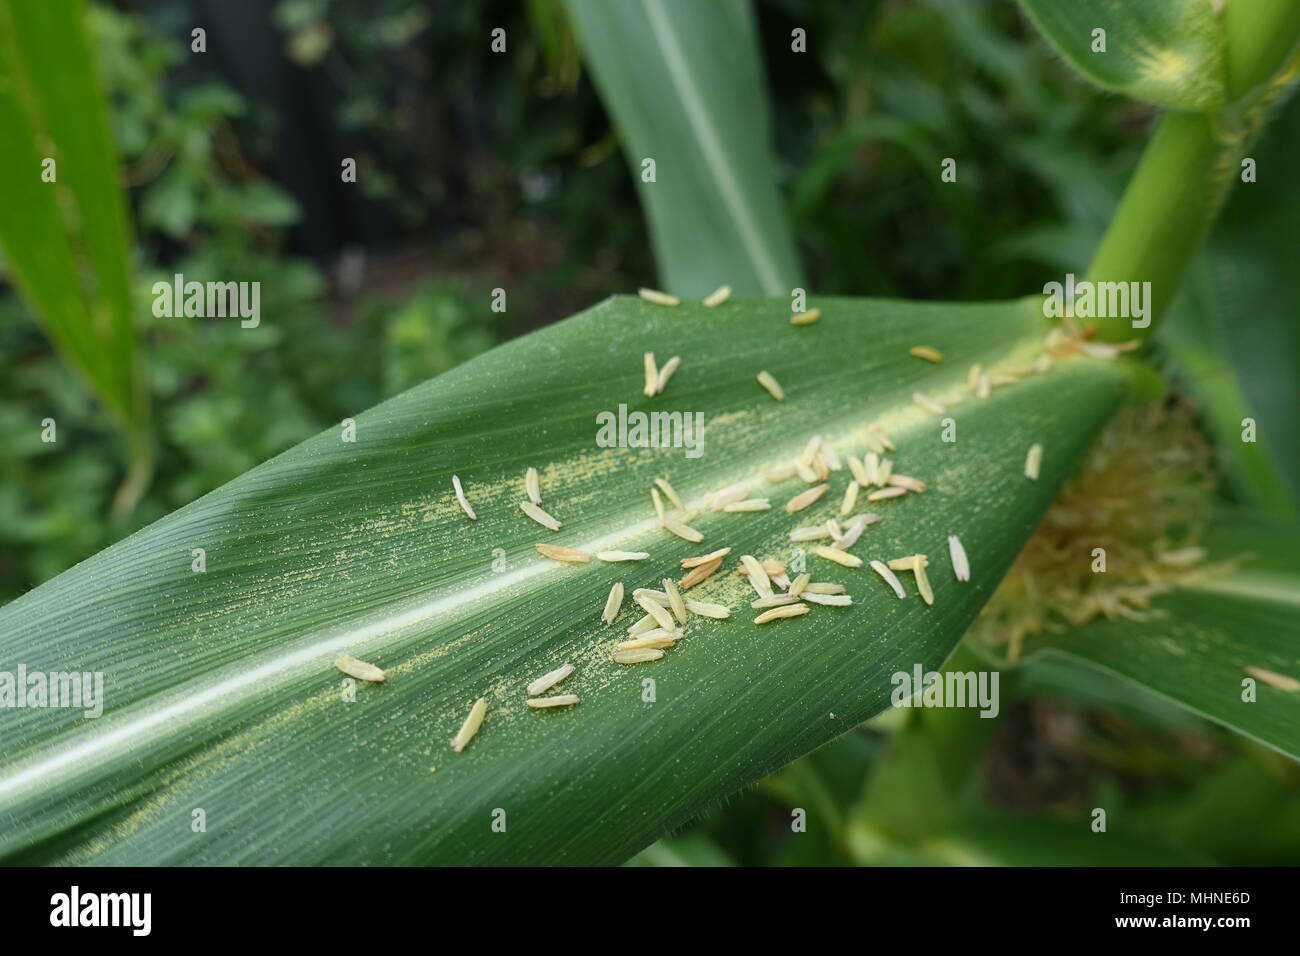 Close up Glass Gem Corn Maize flowers with pollen on a leaf Stock Photo